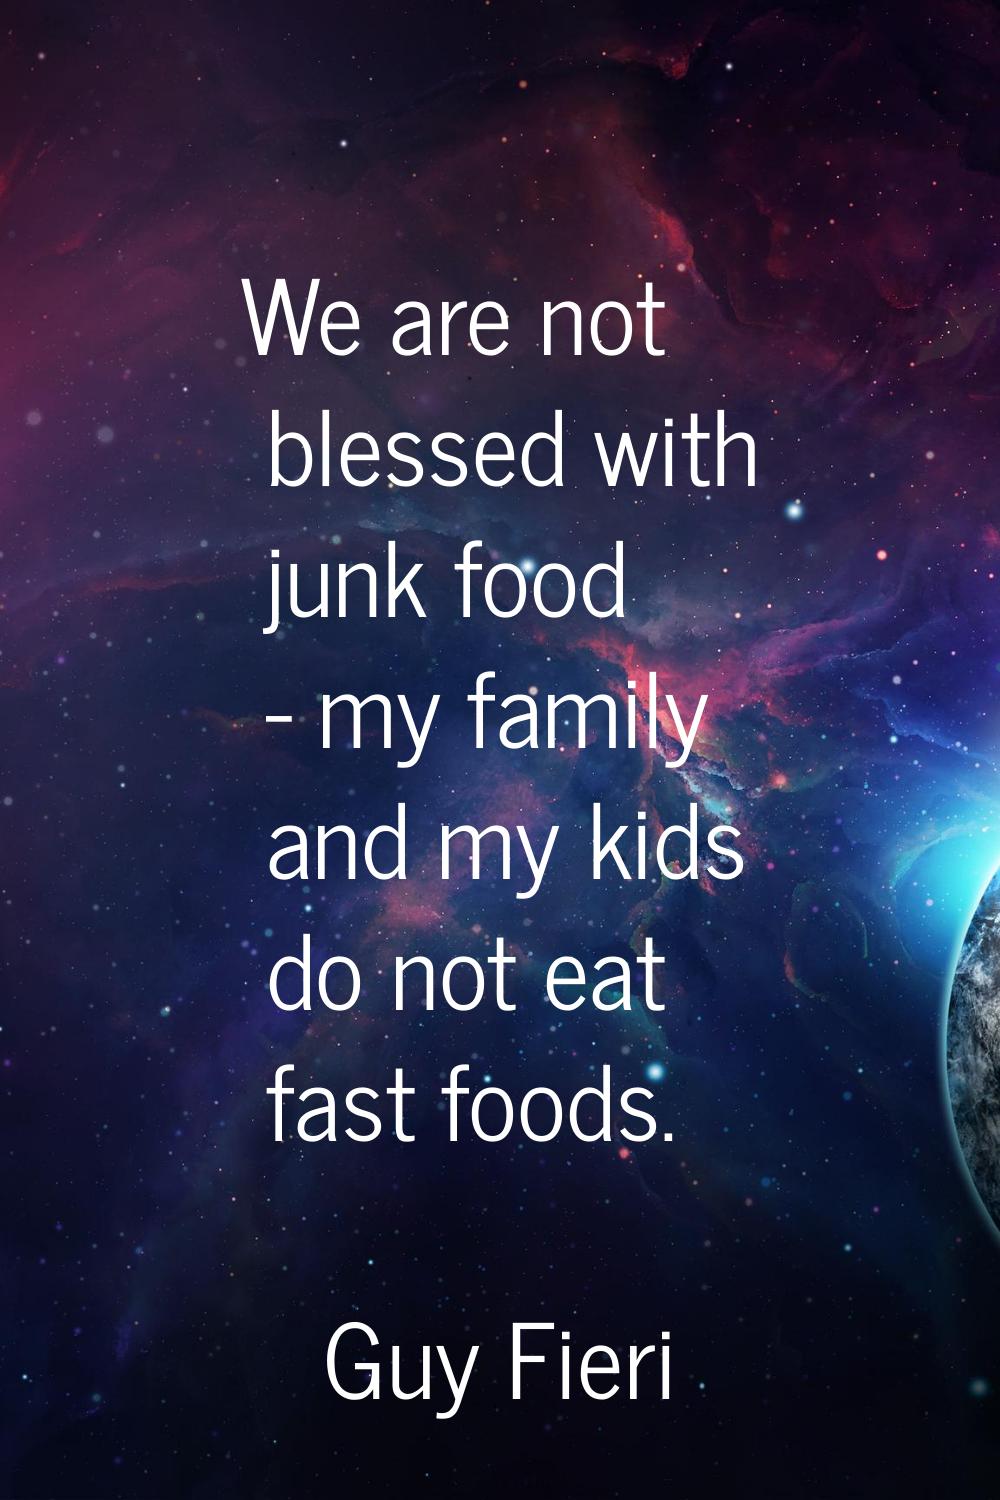 We are not blessed with junk food - my family and my kids do not eat fast foods.